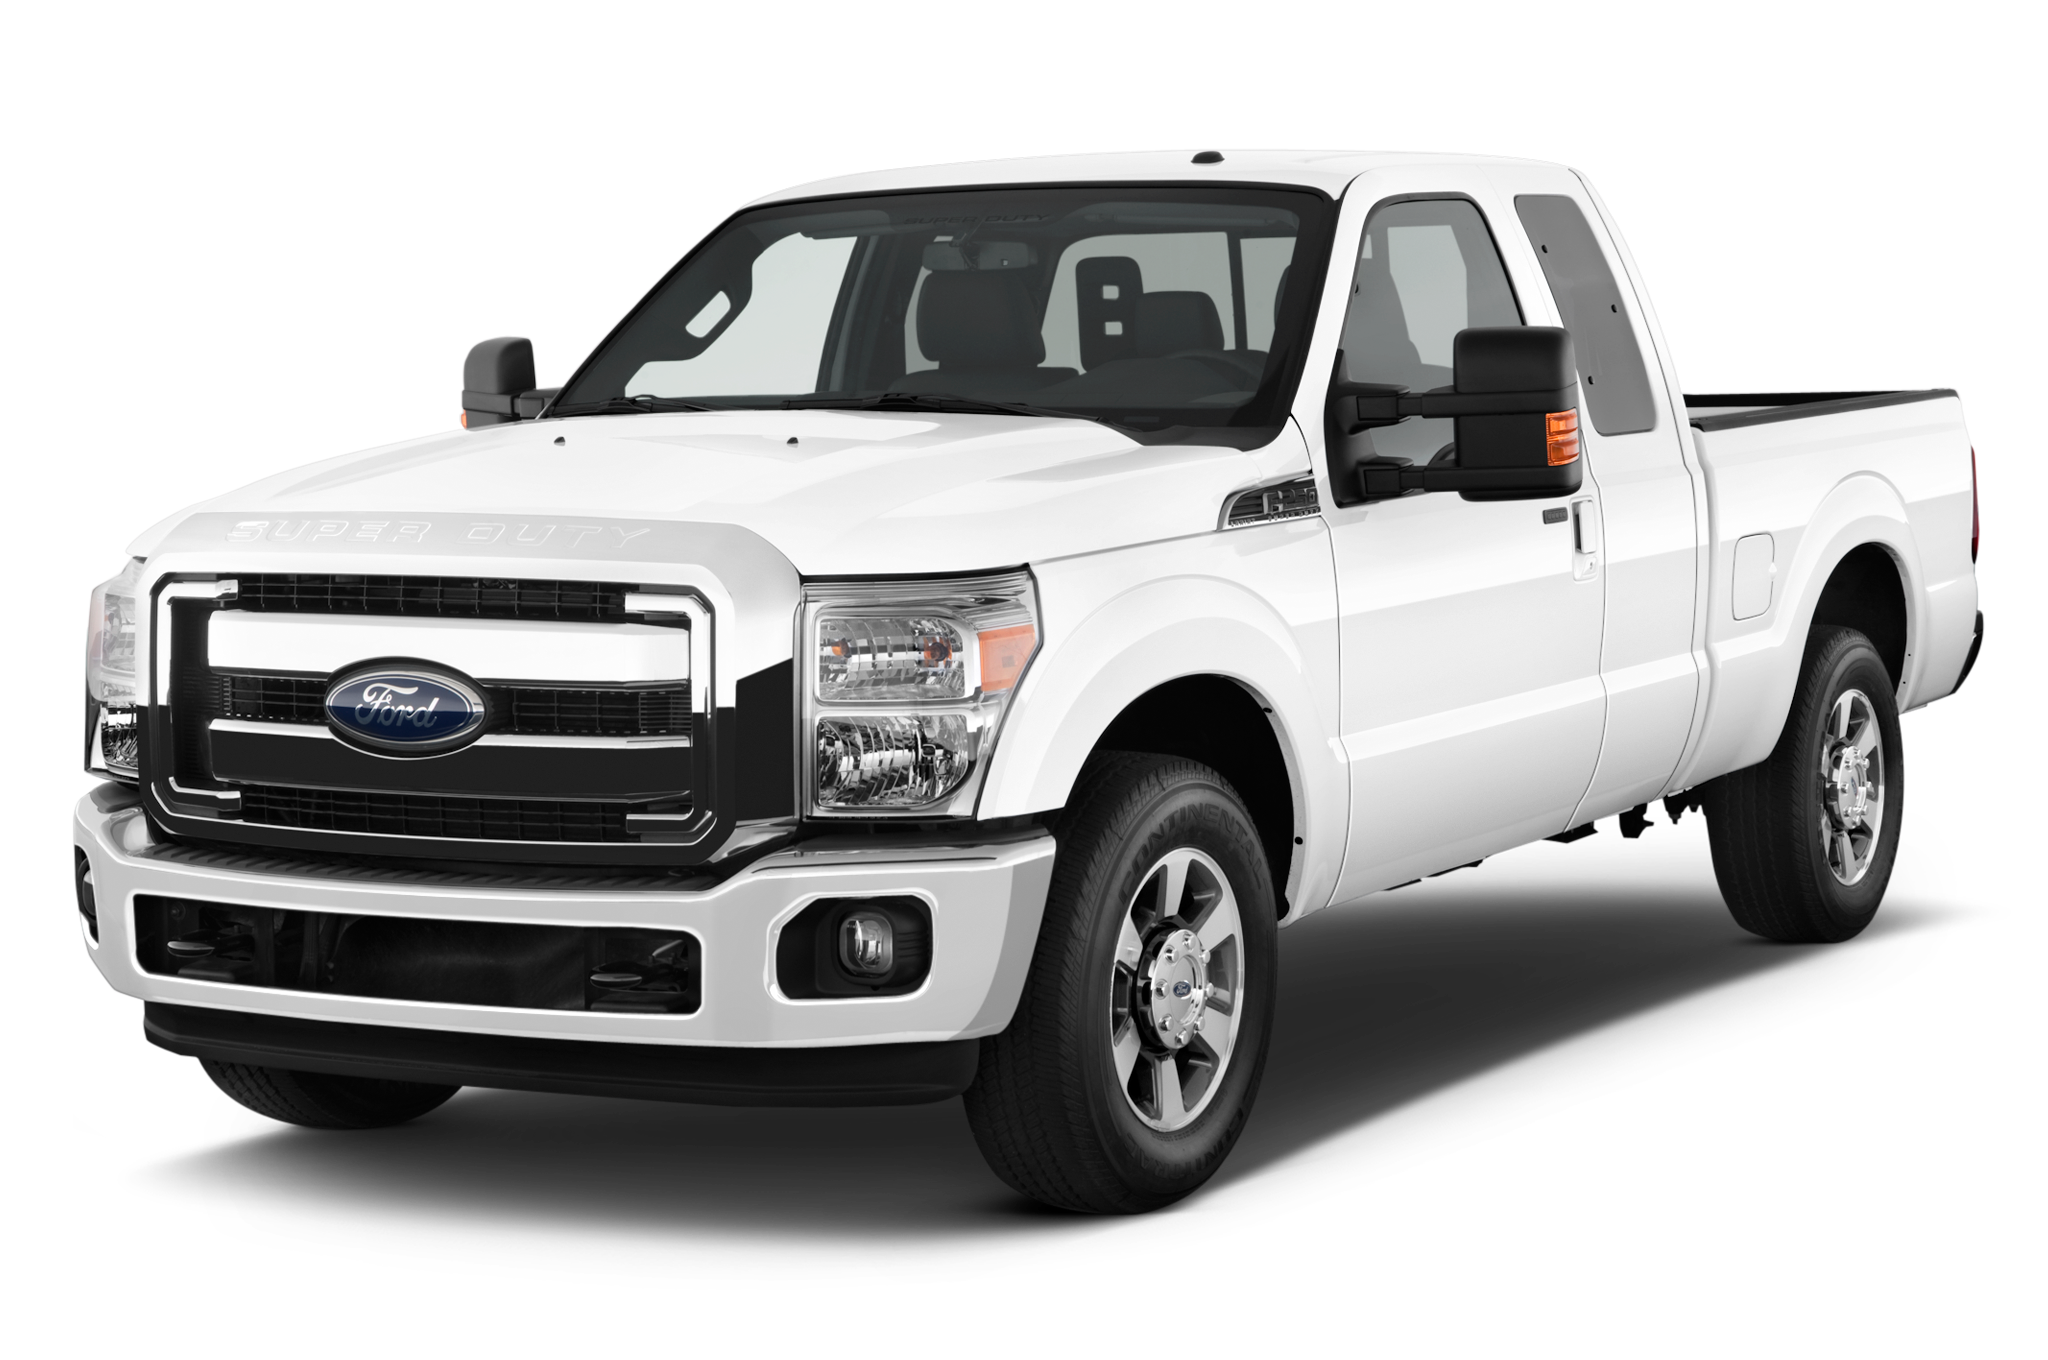 HQ Ford F-250 Lariat Wallpapers | File 1317.14Kb